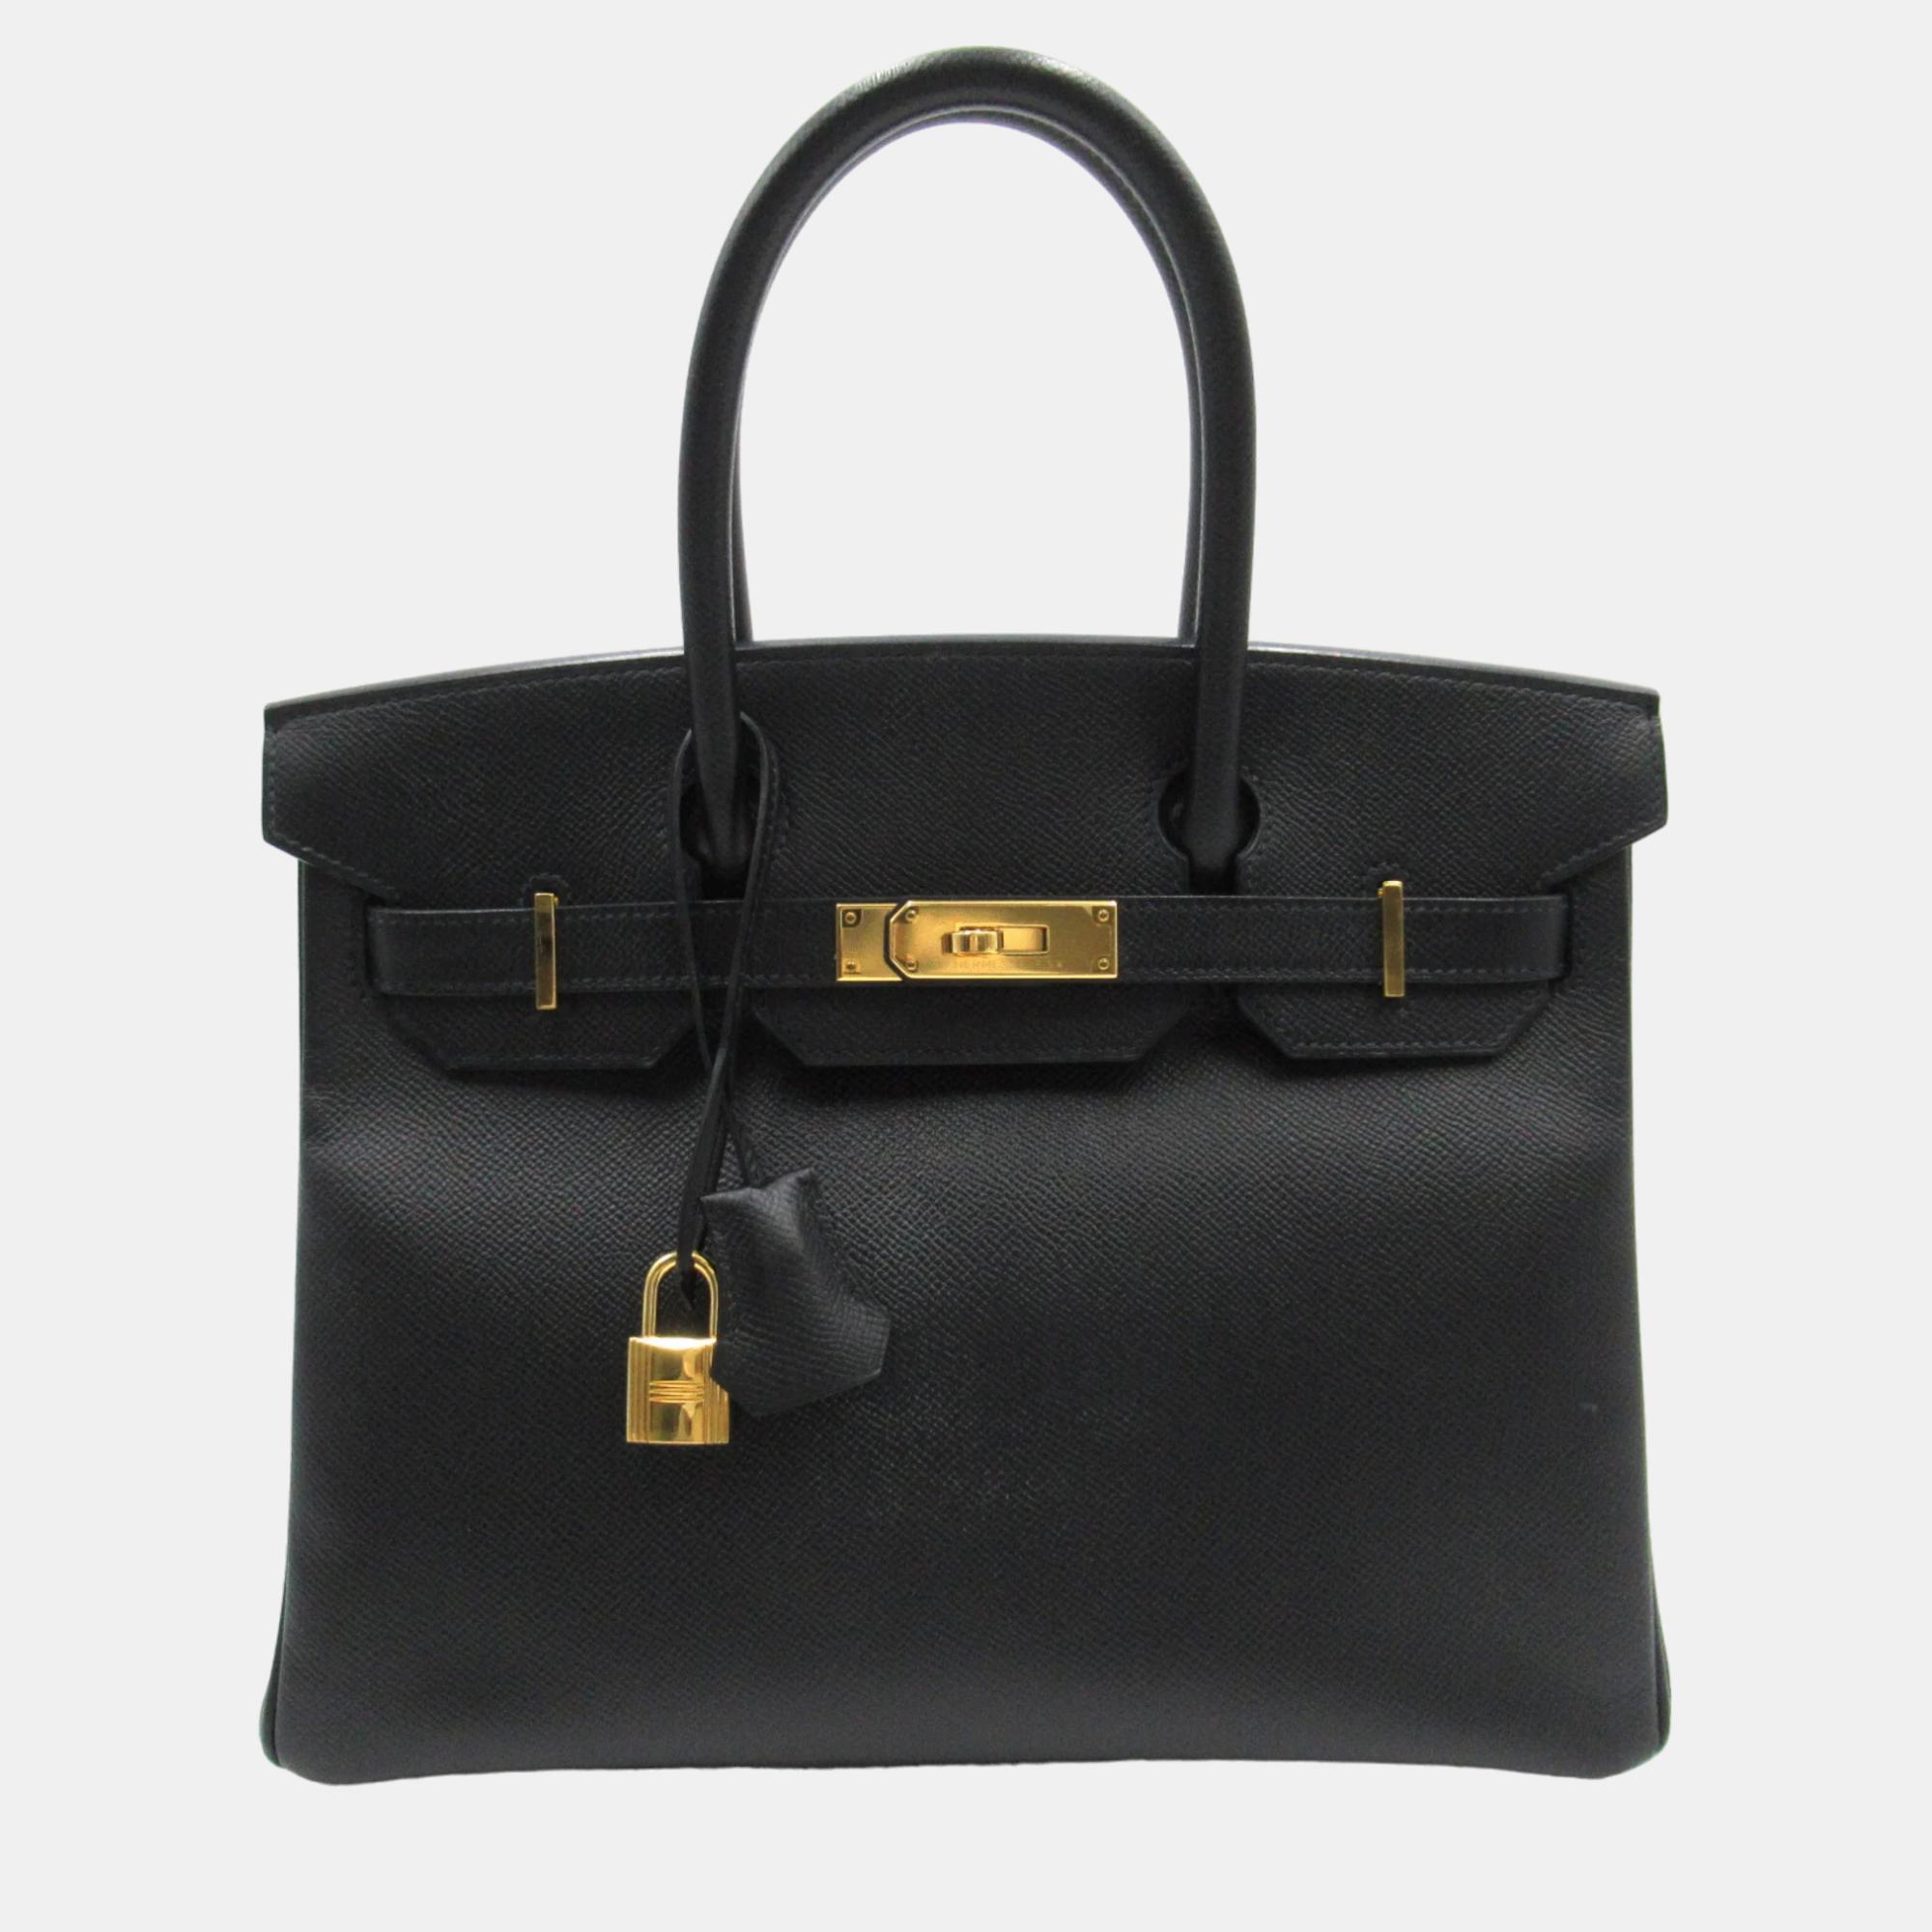 Hermès handbags are known for their unique designs that emanate the labels elegant flair and the labels immaculate craftsmanship makes their creations last season after season. Here is a stunning bag meticulously crafted and stitched to perfection. Truly a refined elevation for your ensemble.